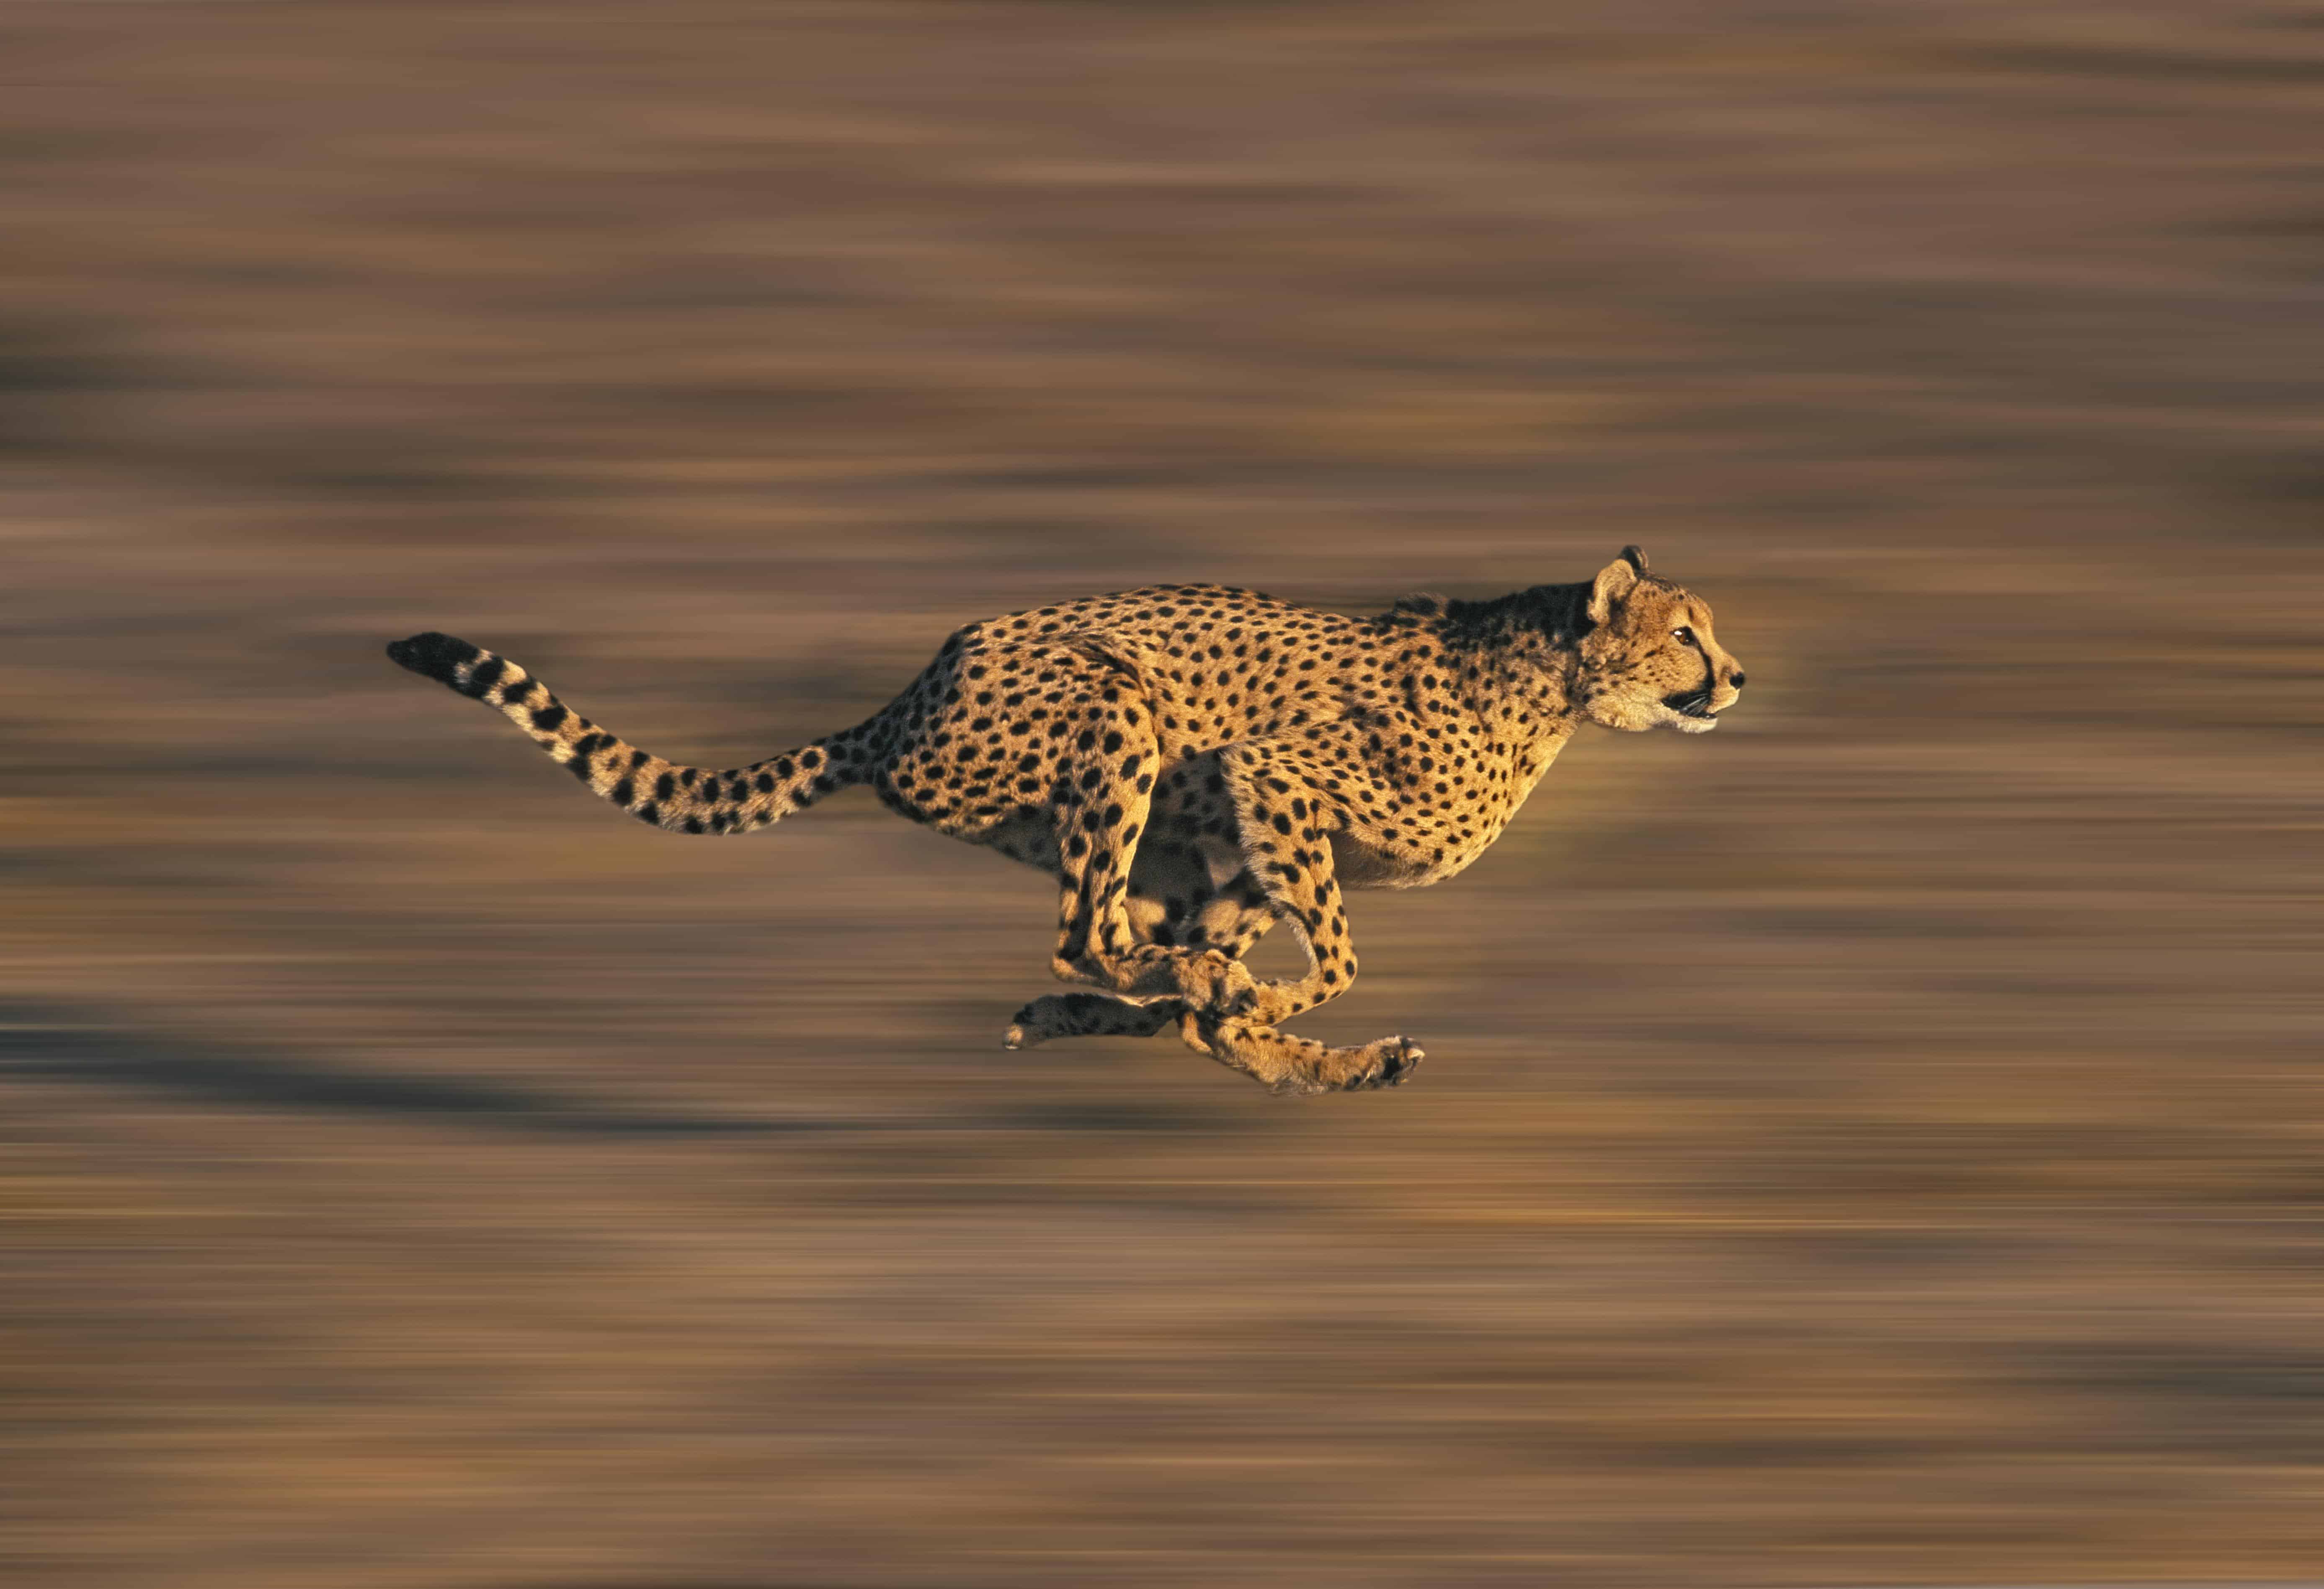 Unbelievable! Witness The Mind-Blowing Speed Of The Cheetah In Short Bursts!